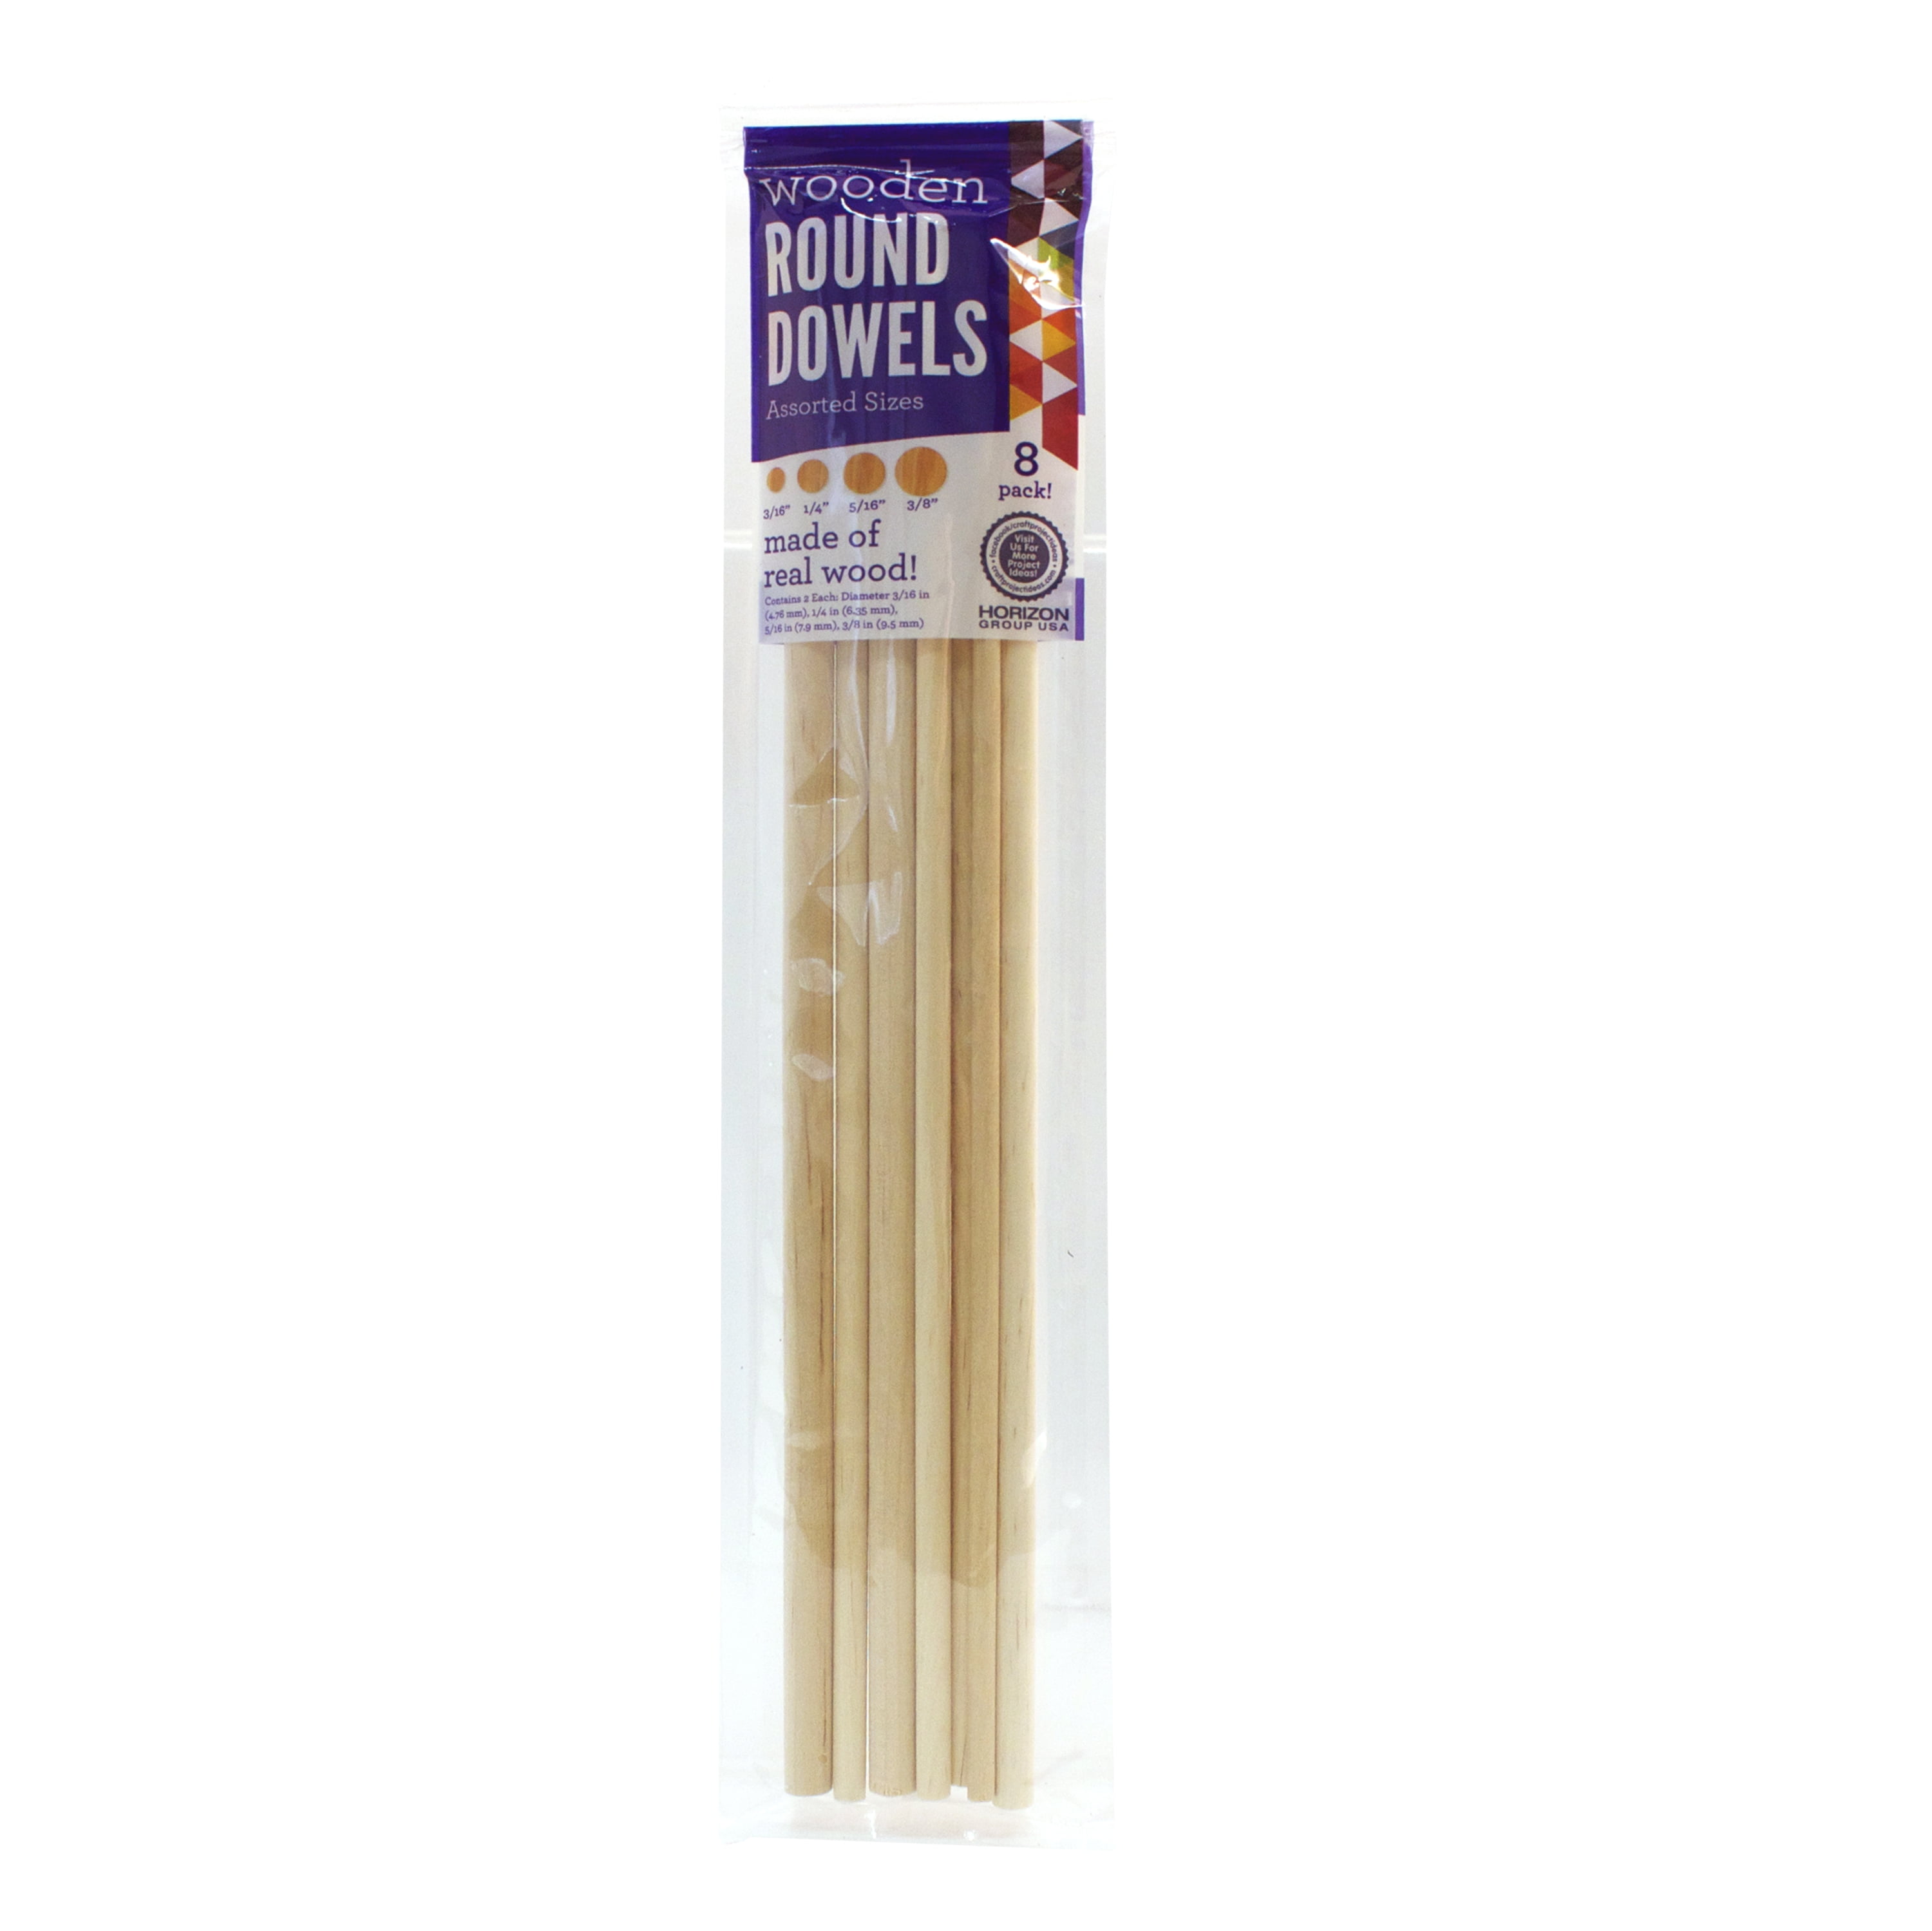 Go Create Wood Dowels, 50-Pack Wooden Dowel Rods - DroneUp Delivery